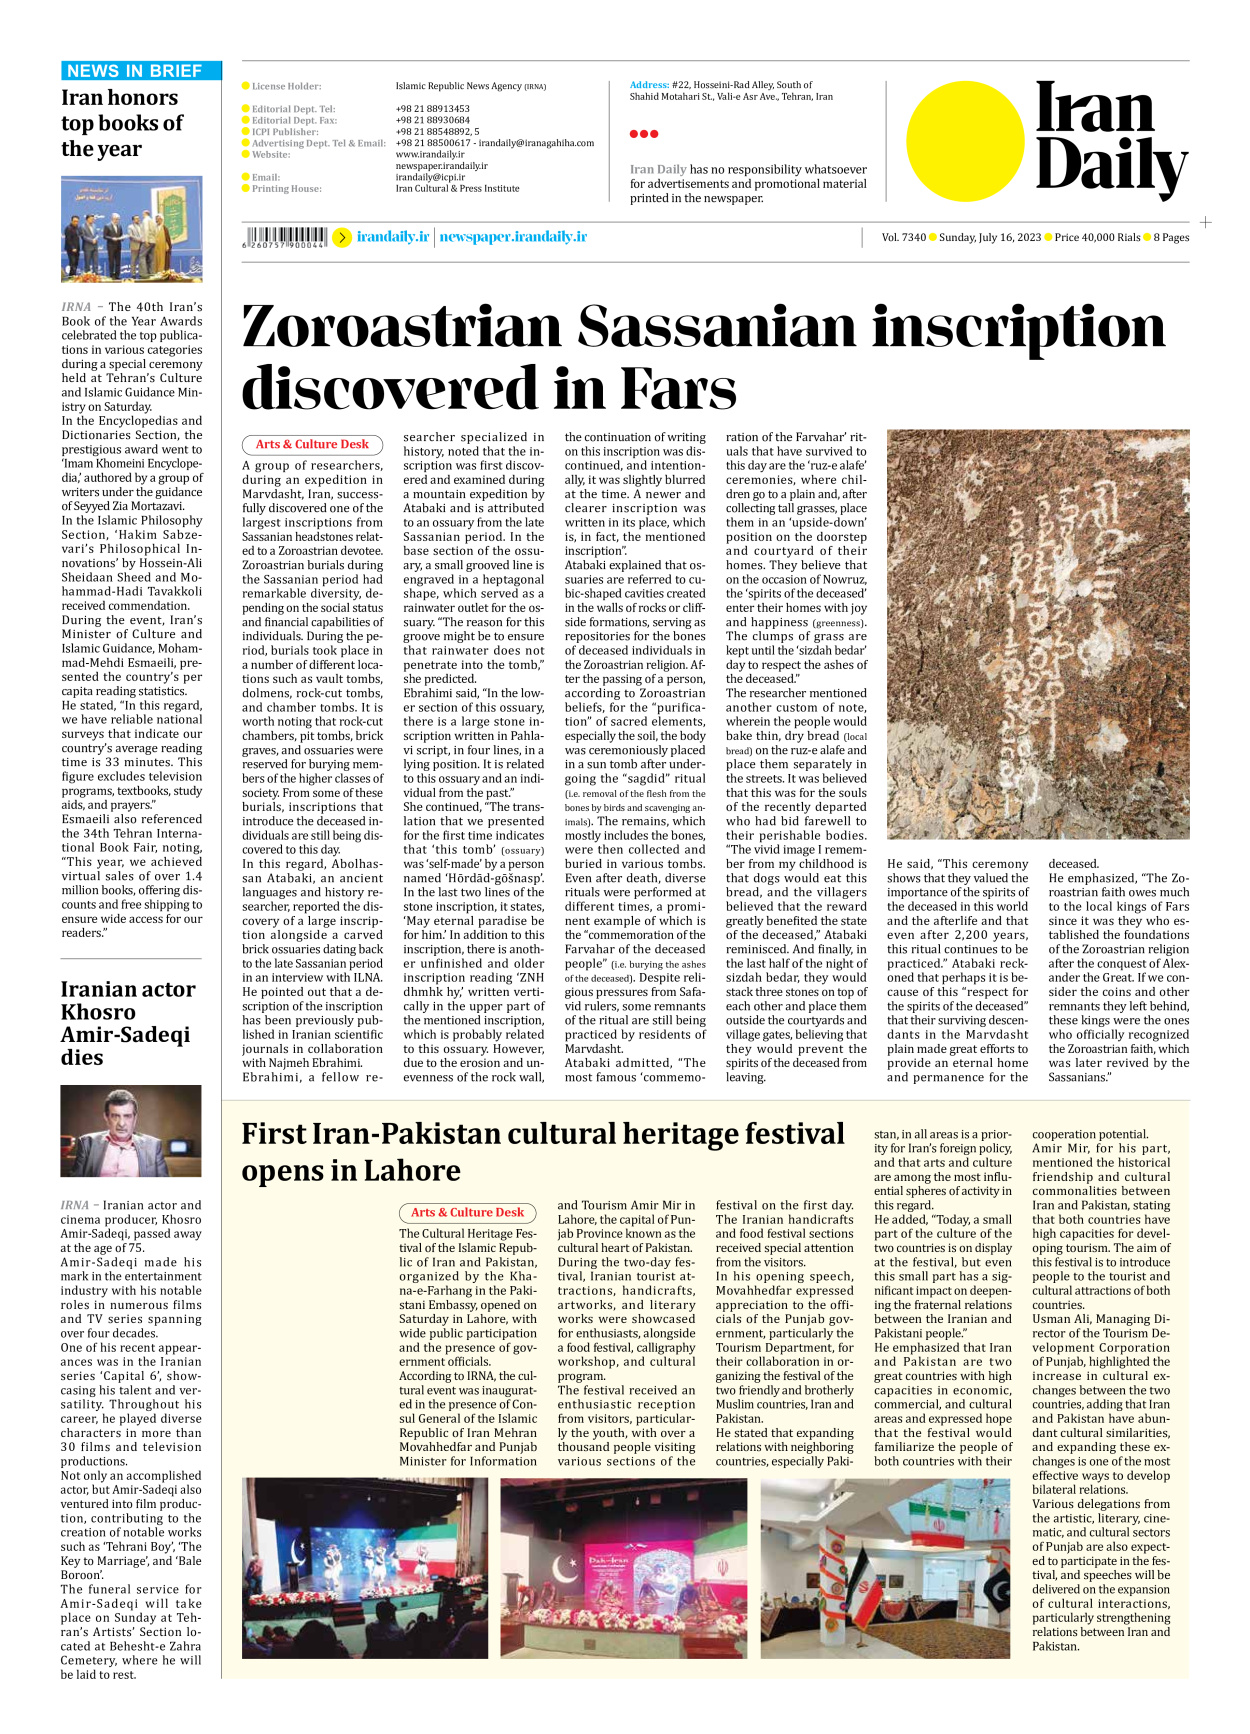 Iran Daily - Number Seven Thousand Three Hundred and Forty - 16 July 2023 - Page 8